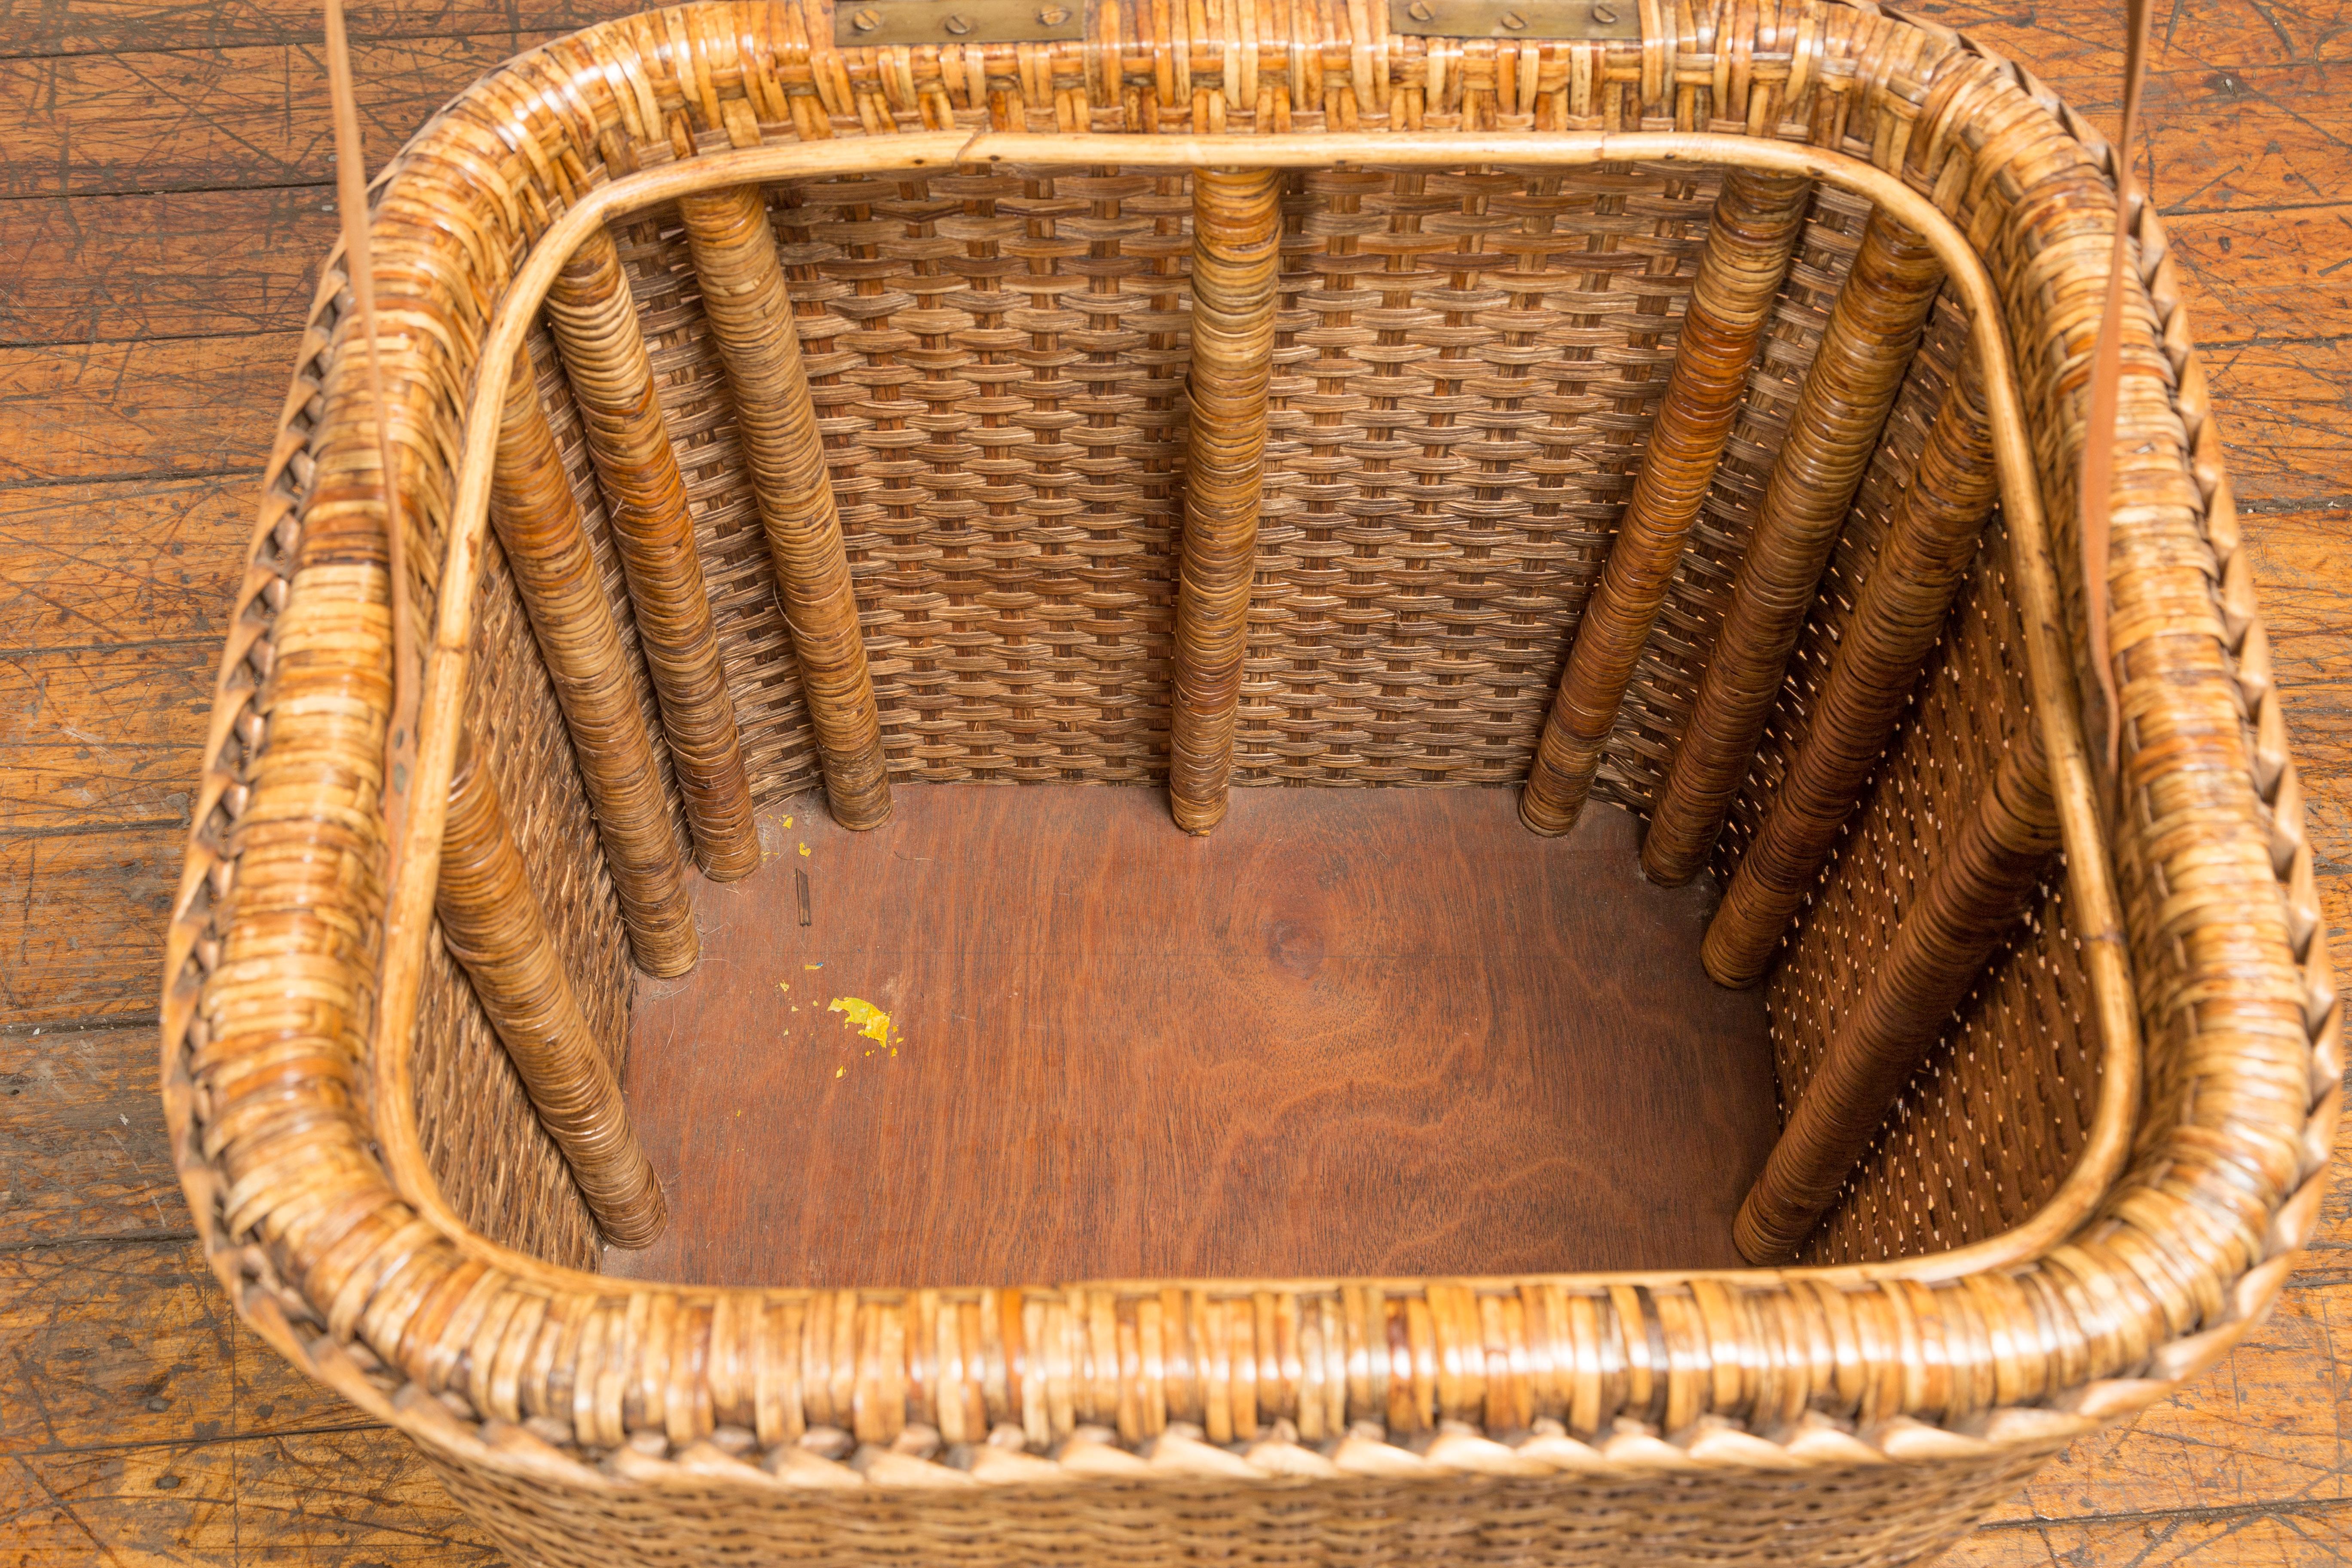 Vintage Burmese Woven Rattan and Wood Lidded Basket or Storage Container For Sale 7